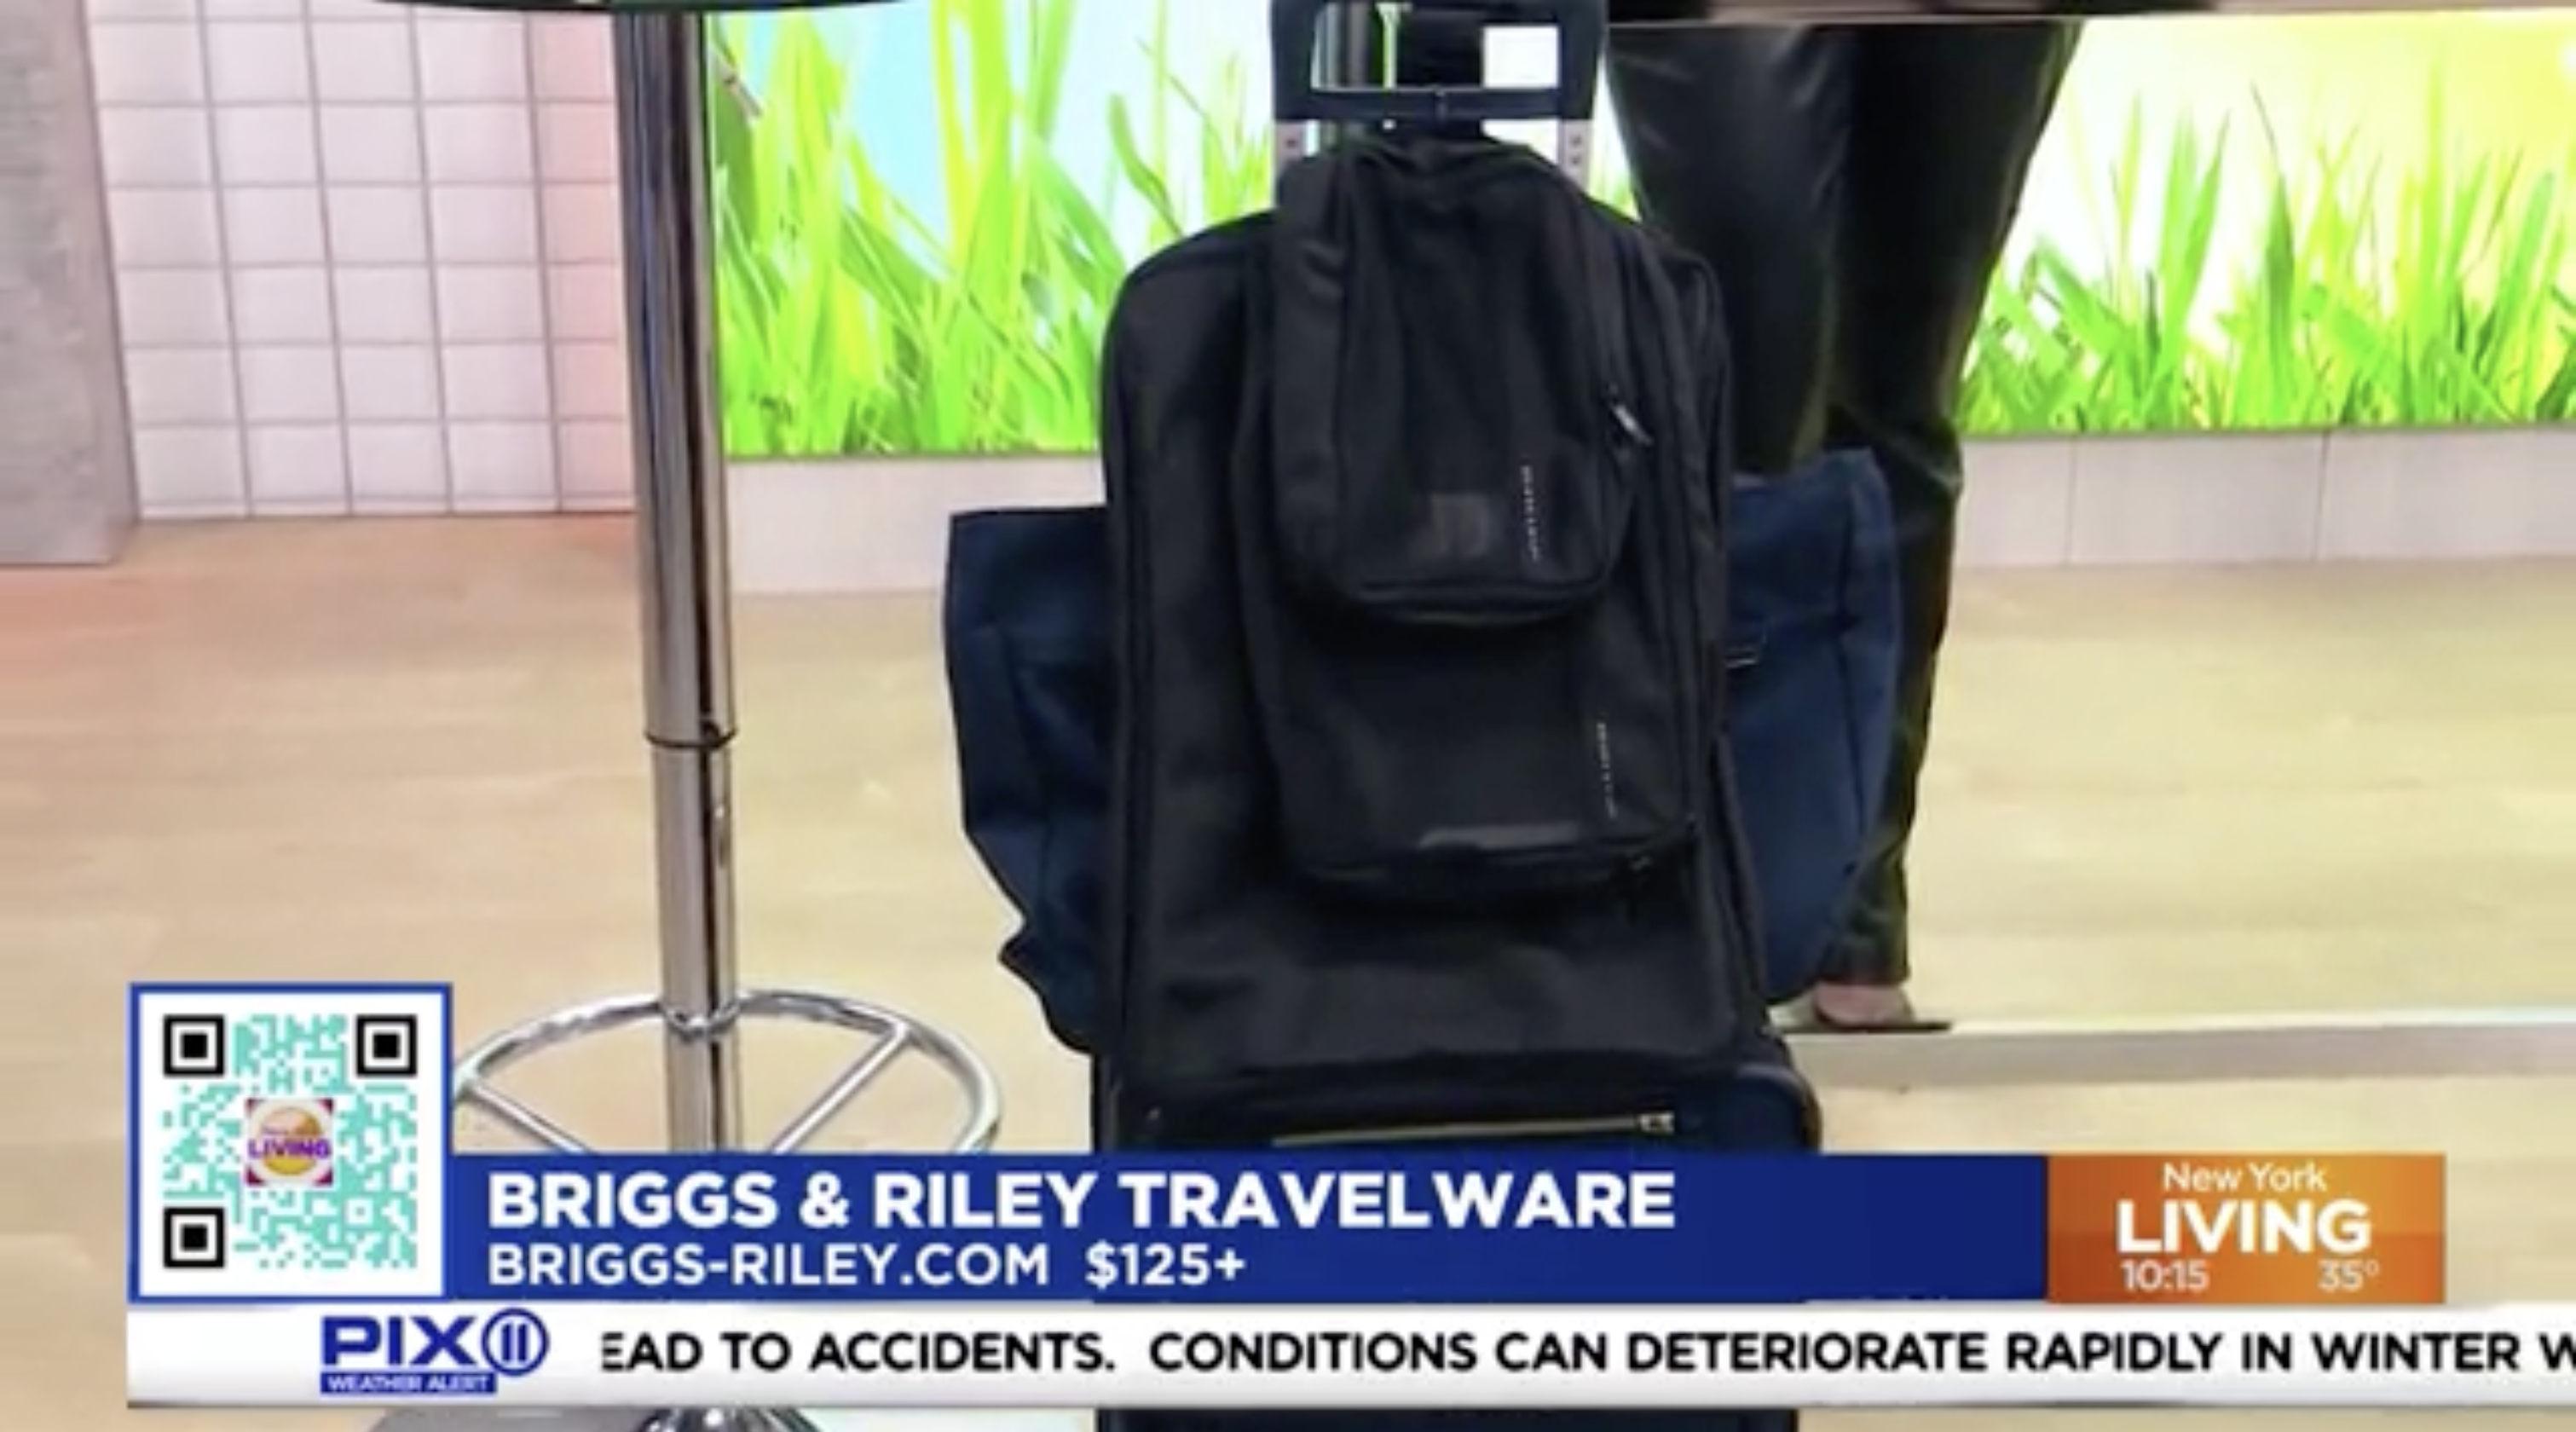 Briggs and Riley Travelware (March promotion with Comfort Cases featured on WPIX TV)